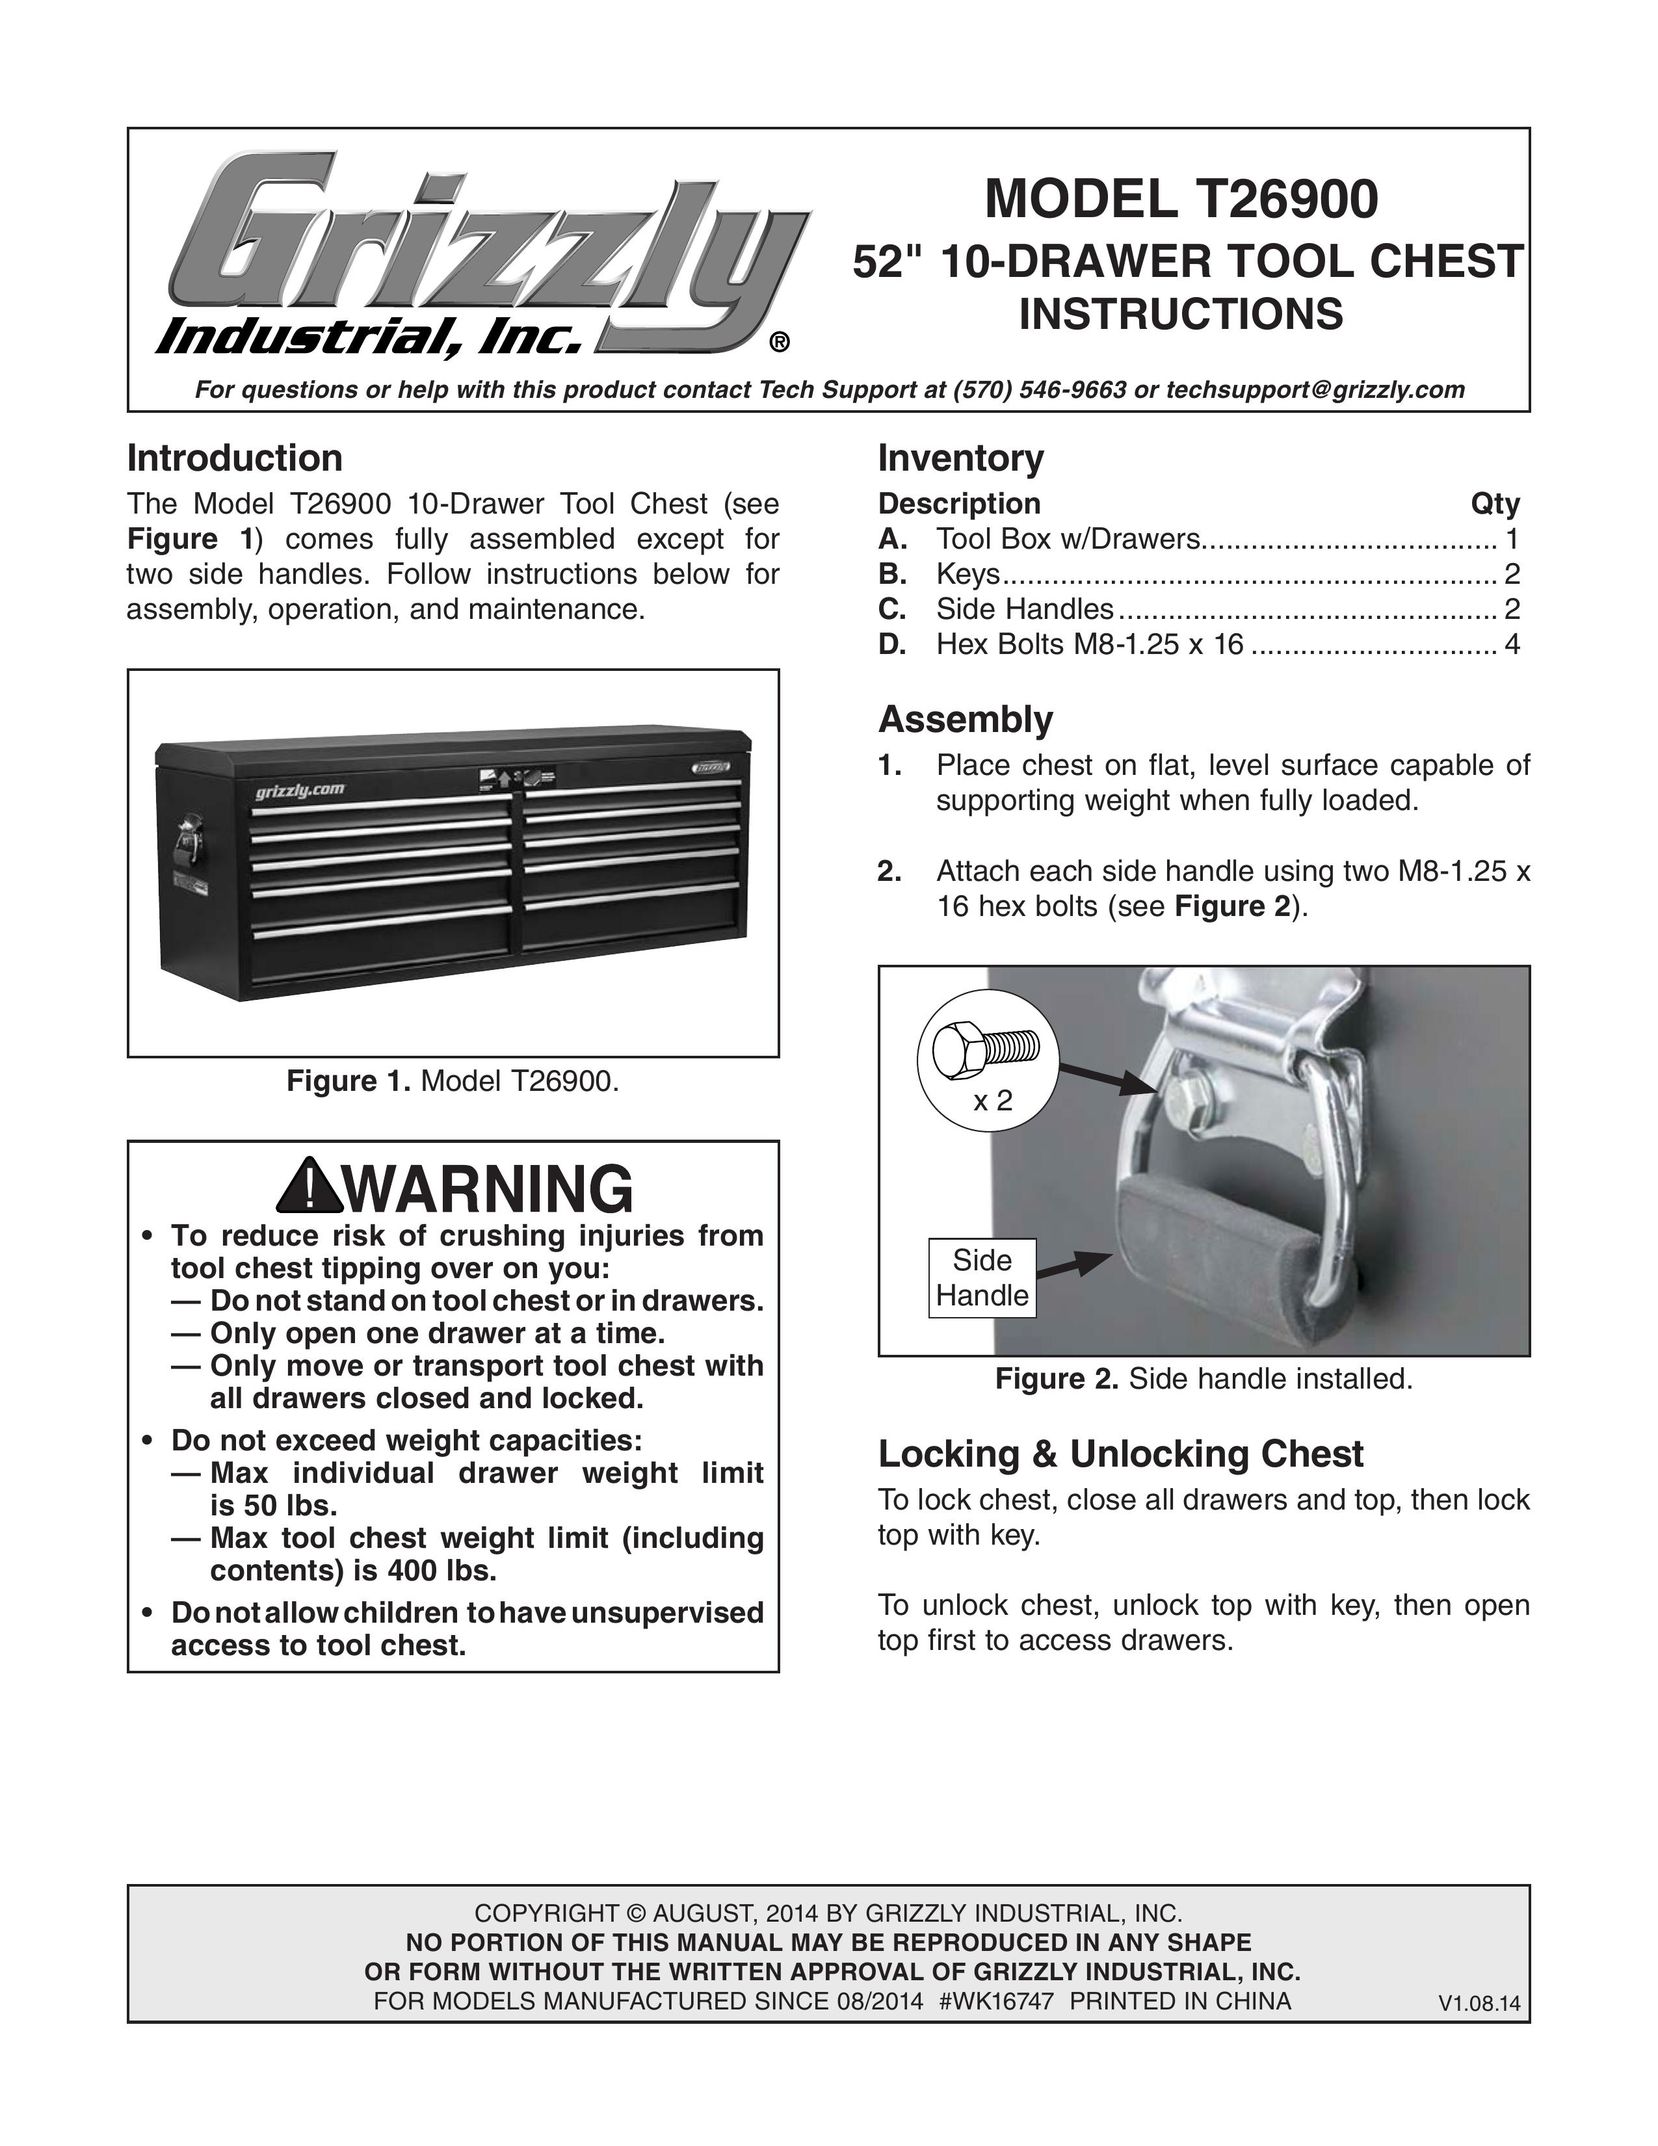 Grizzly T26900 Tool Storage User Manual